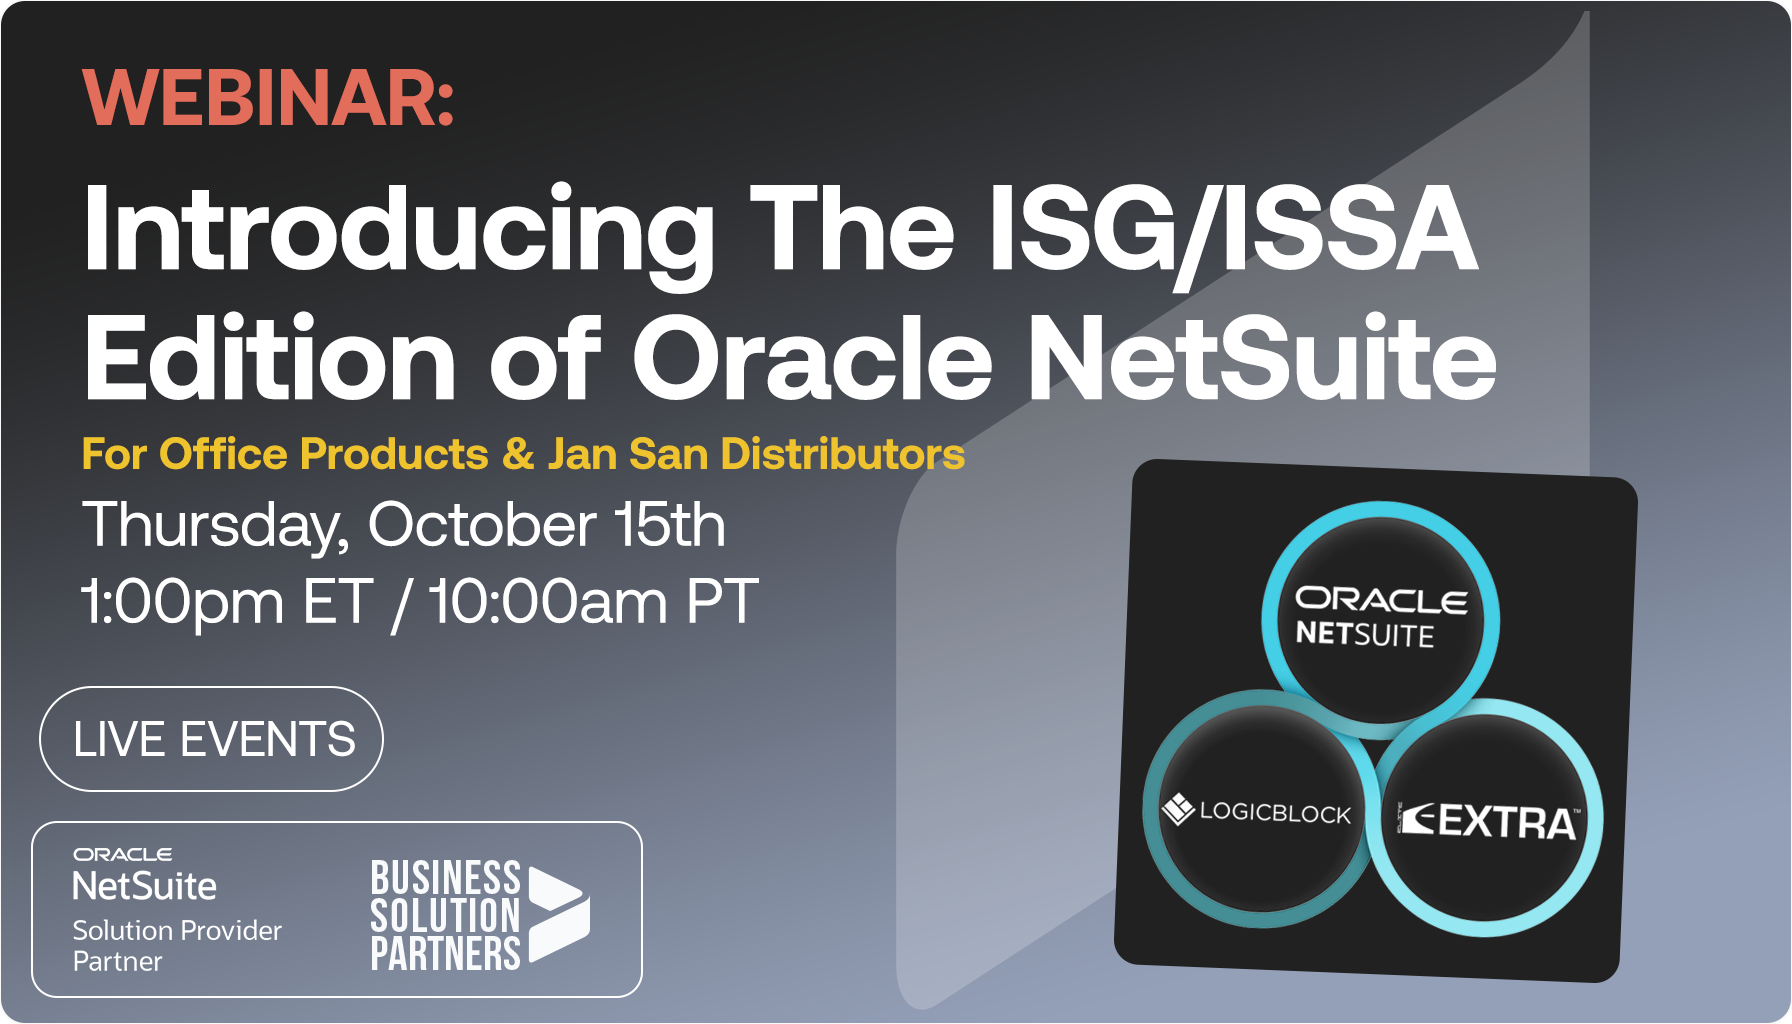 Introducing the ISG/ISSA Edition of Oracle NetSuite - A Webinar by Business Solution Partners